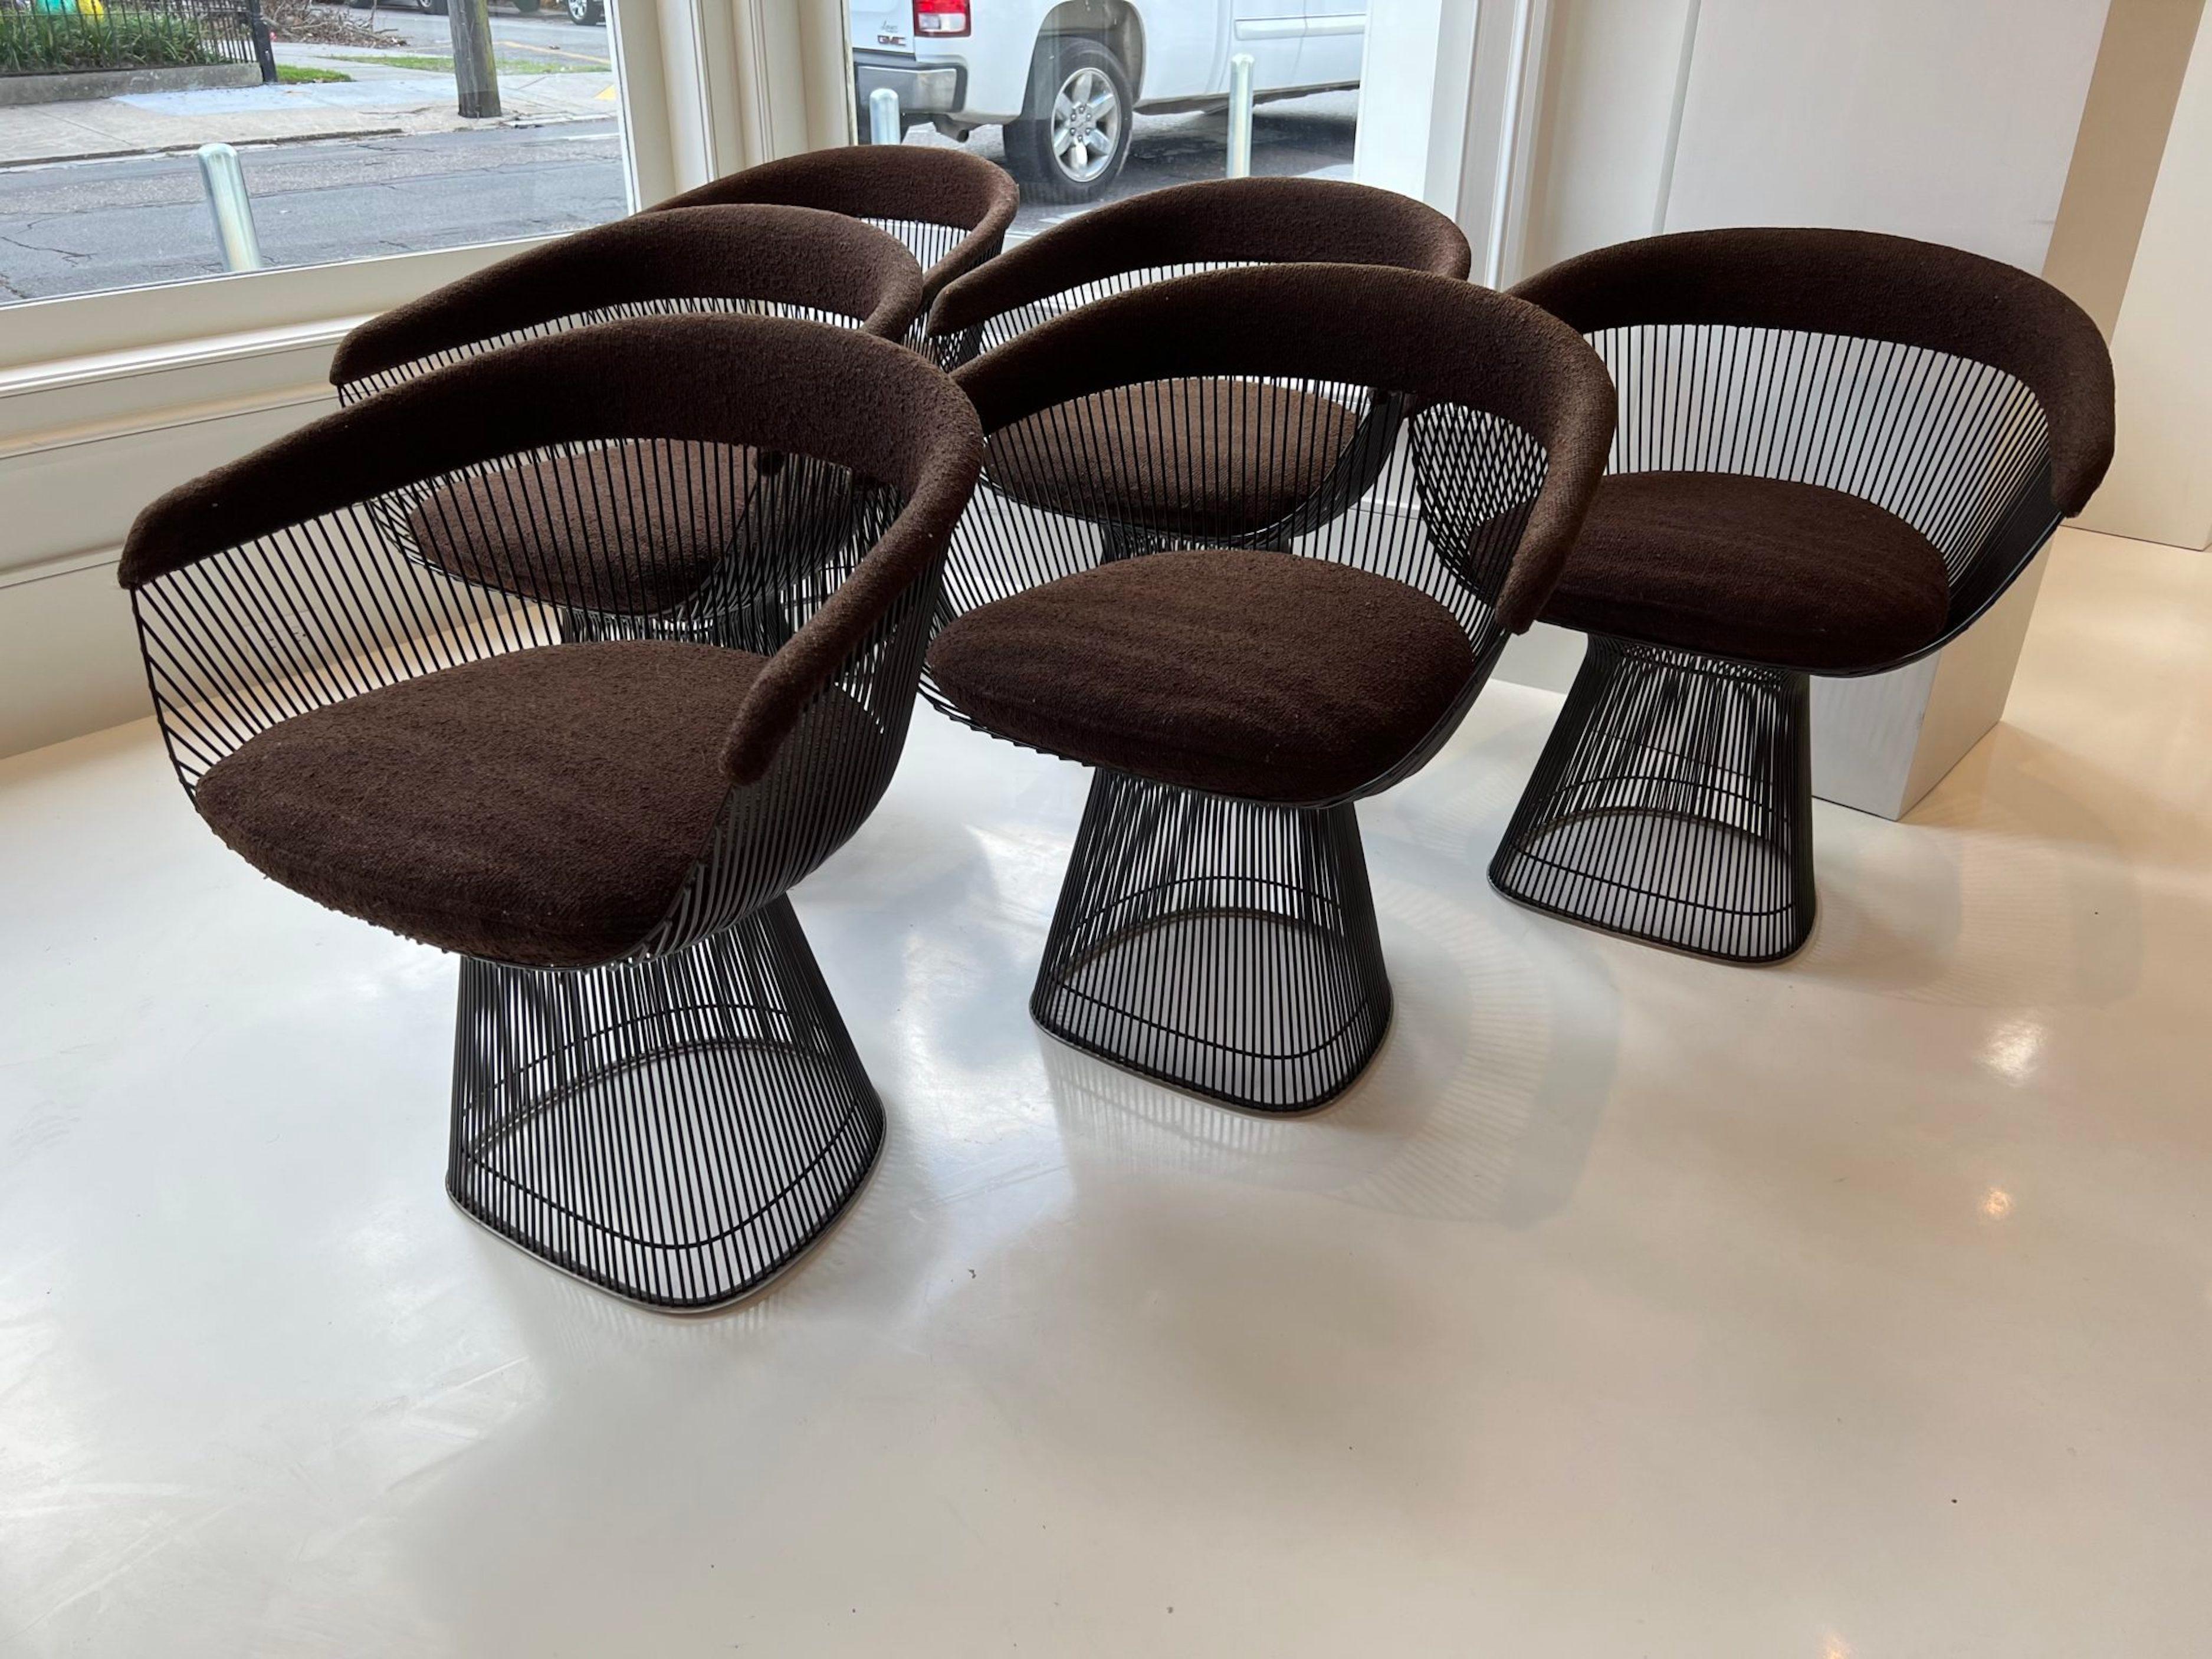 Platner chairs set of 6 iron and fabric by Warren Platner for Knoll, 1970's. The Arm Chair, which can be used as a dining chair or guest chair, is created by welding curved steel rods to circular and semi-circular frames, simultaneously serving as